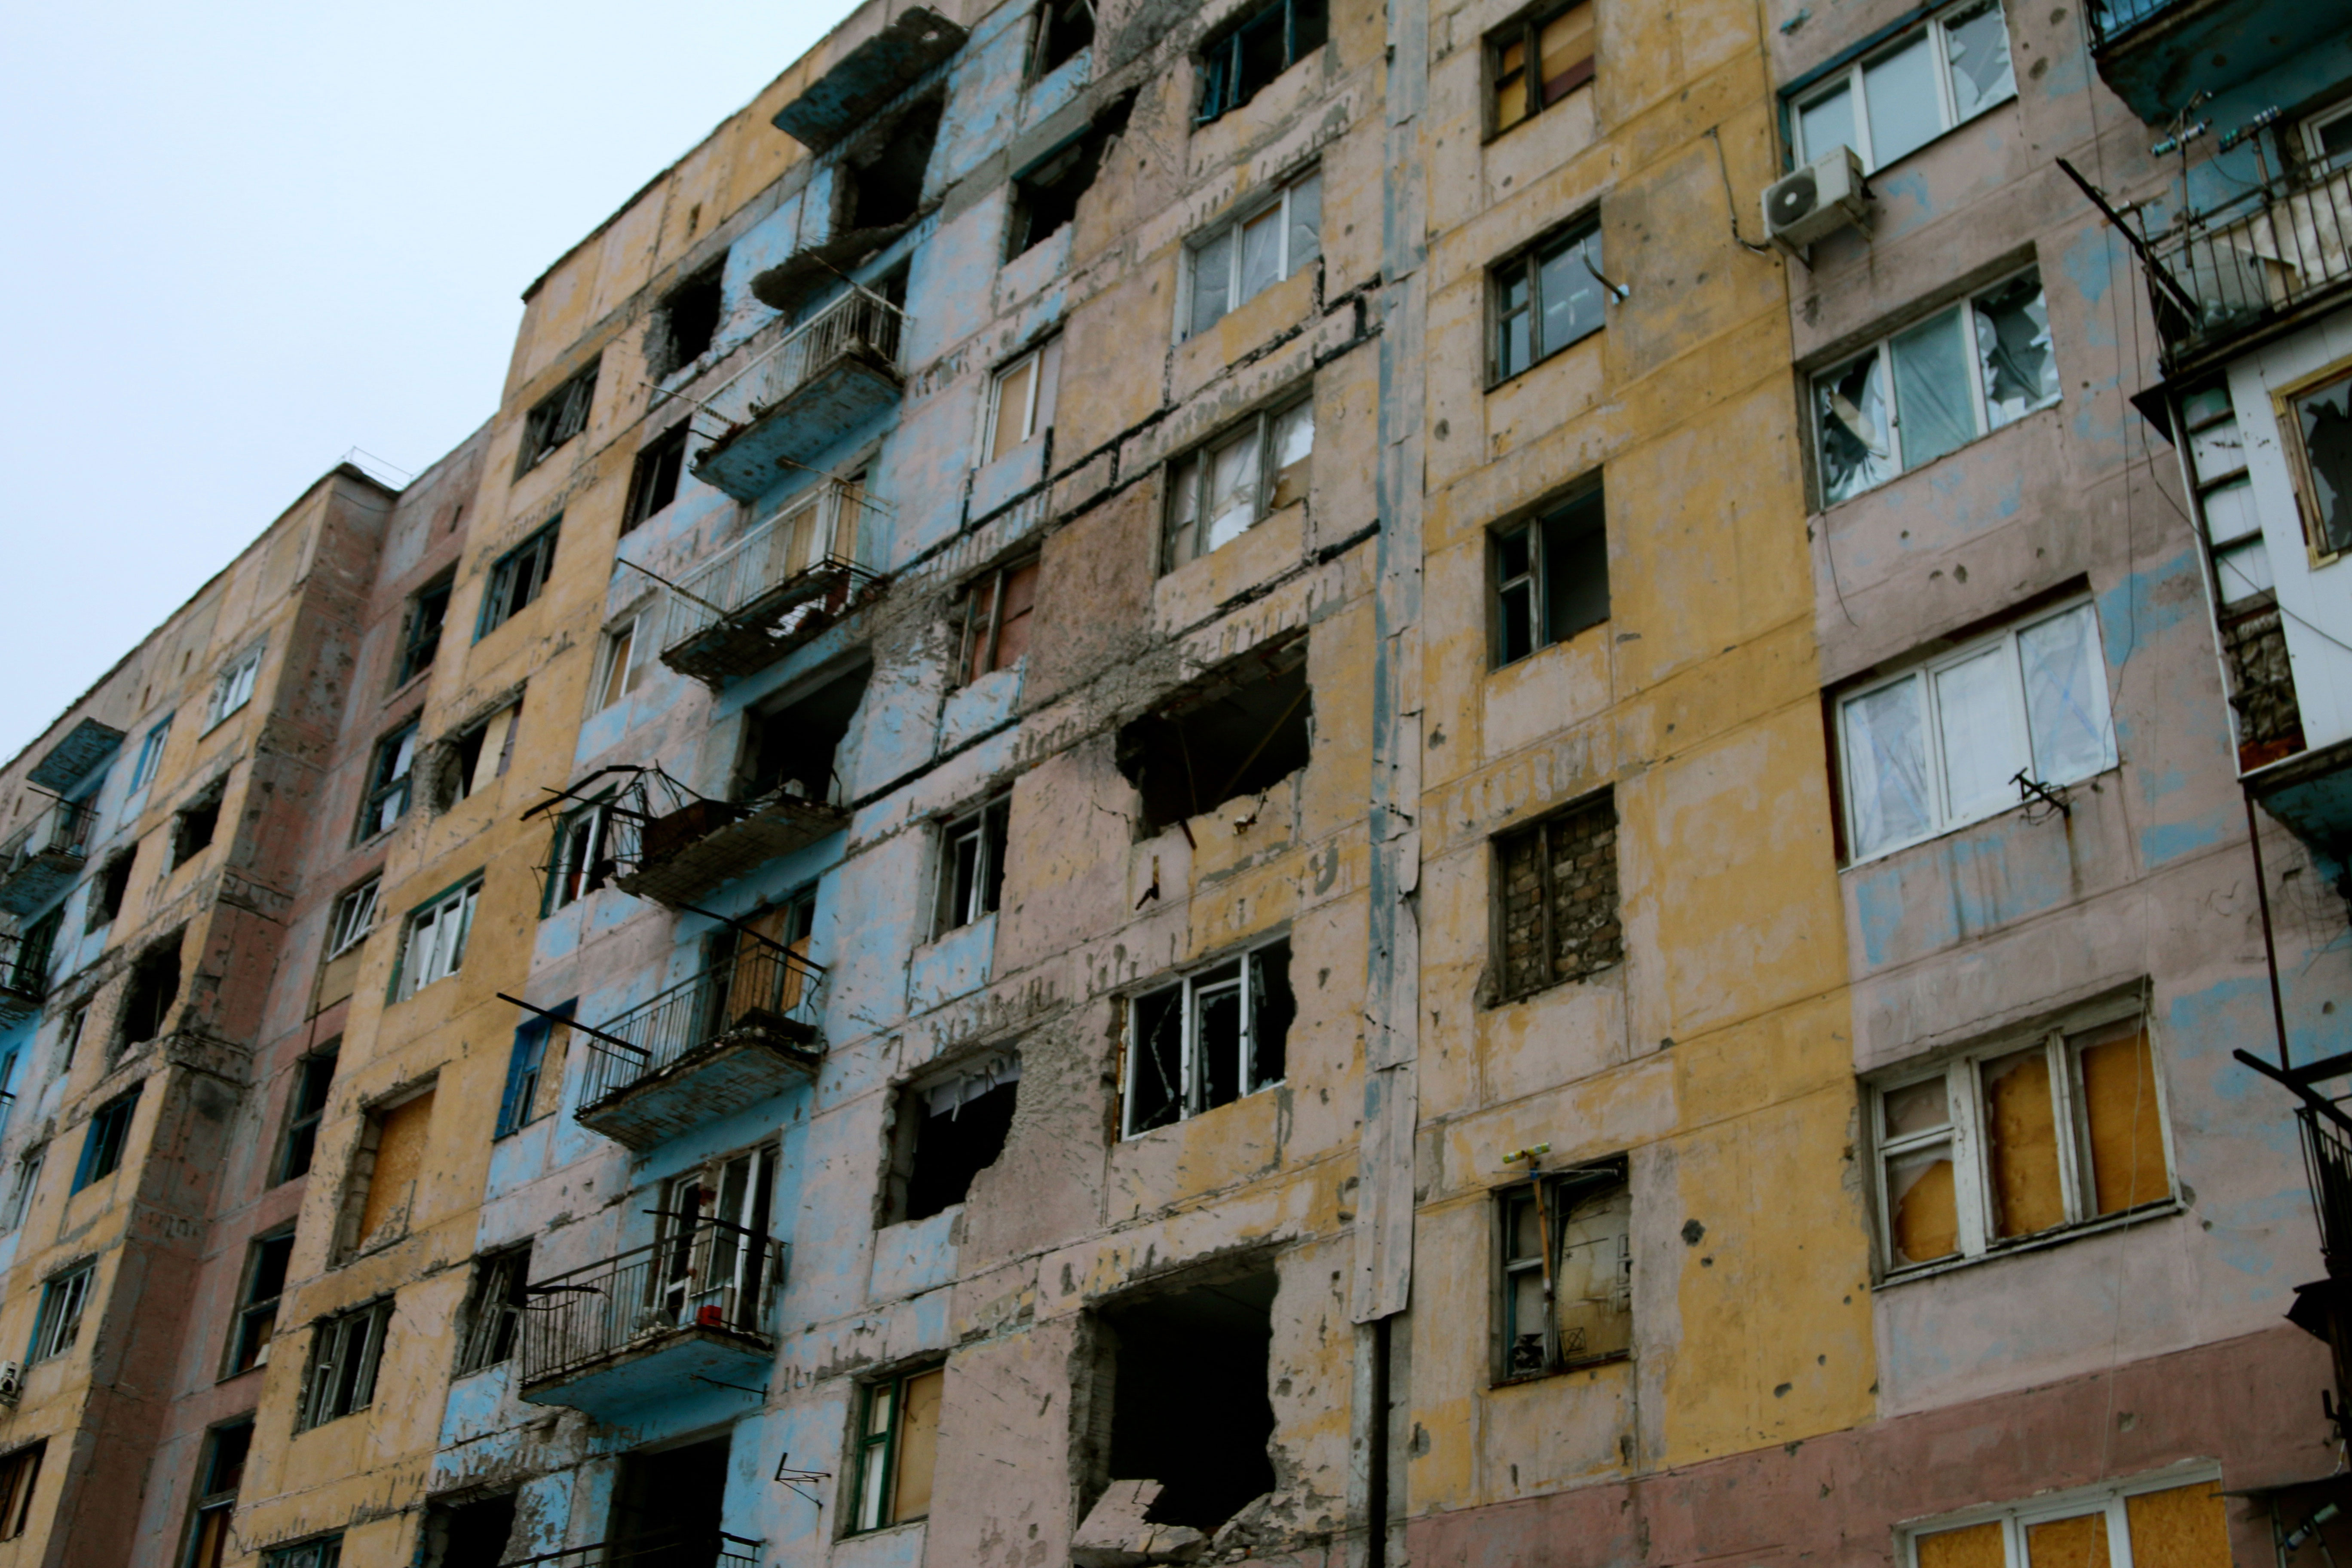 Buildings damaged by the war in the eastern Ukrainian town of Avdiivka.